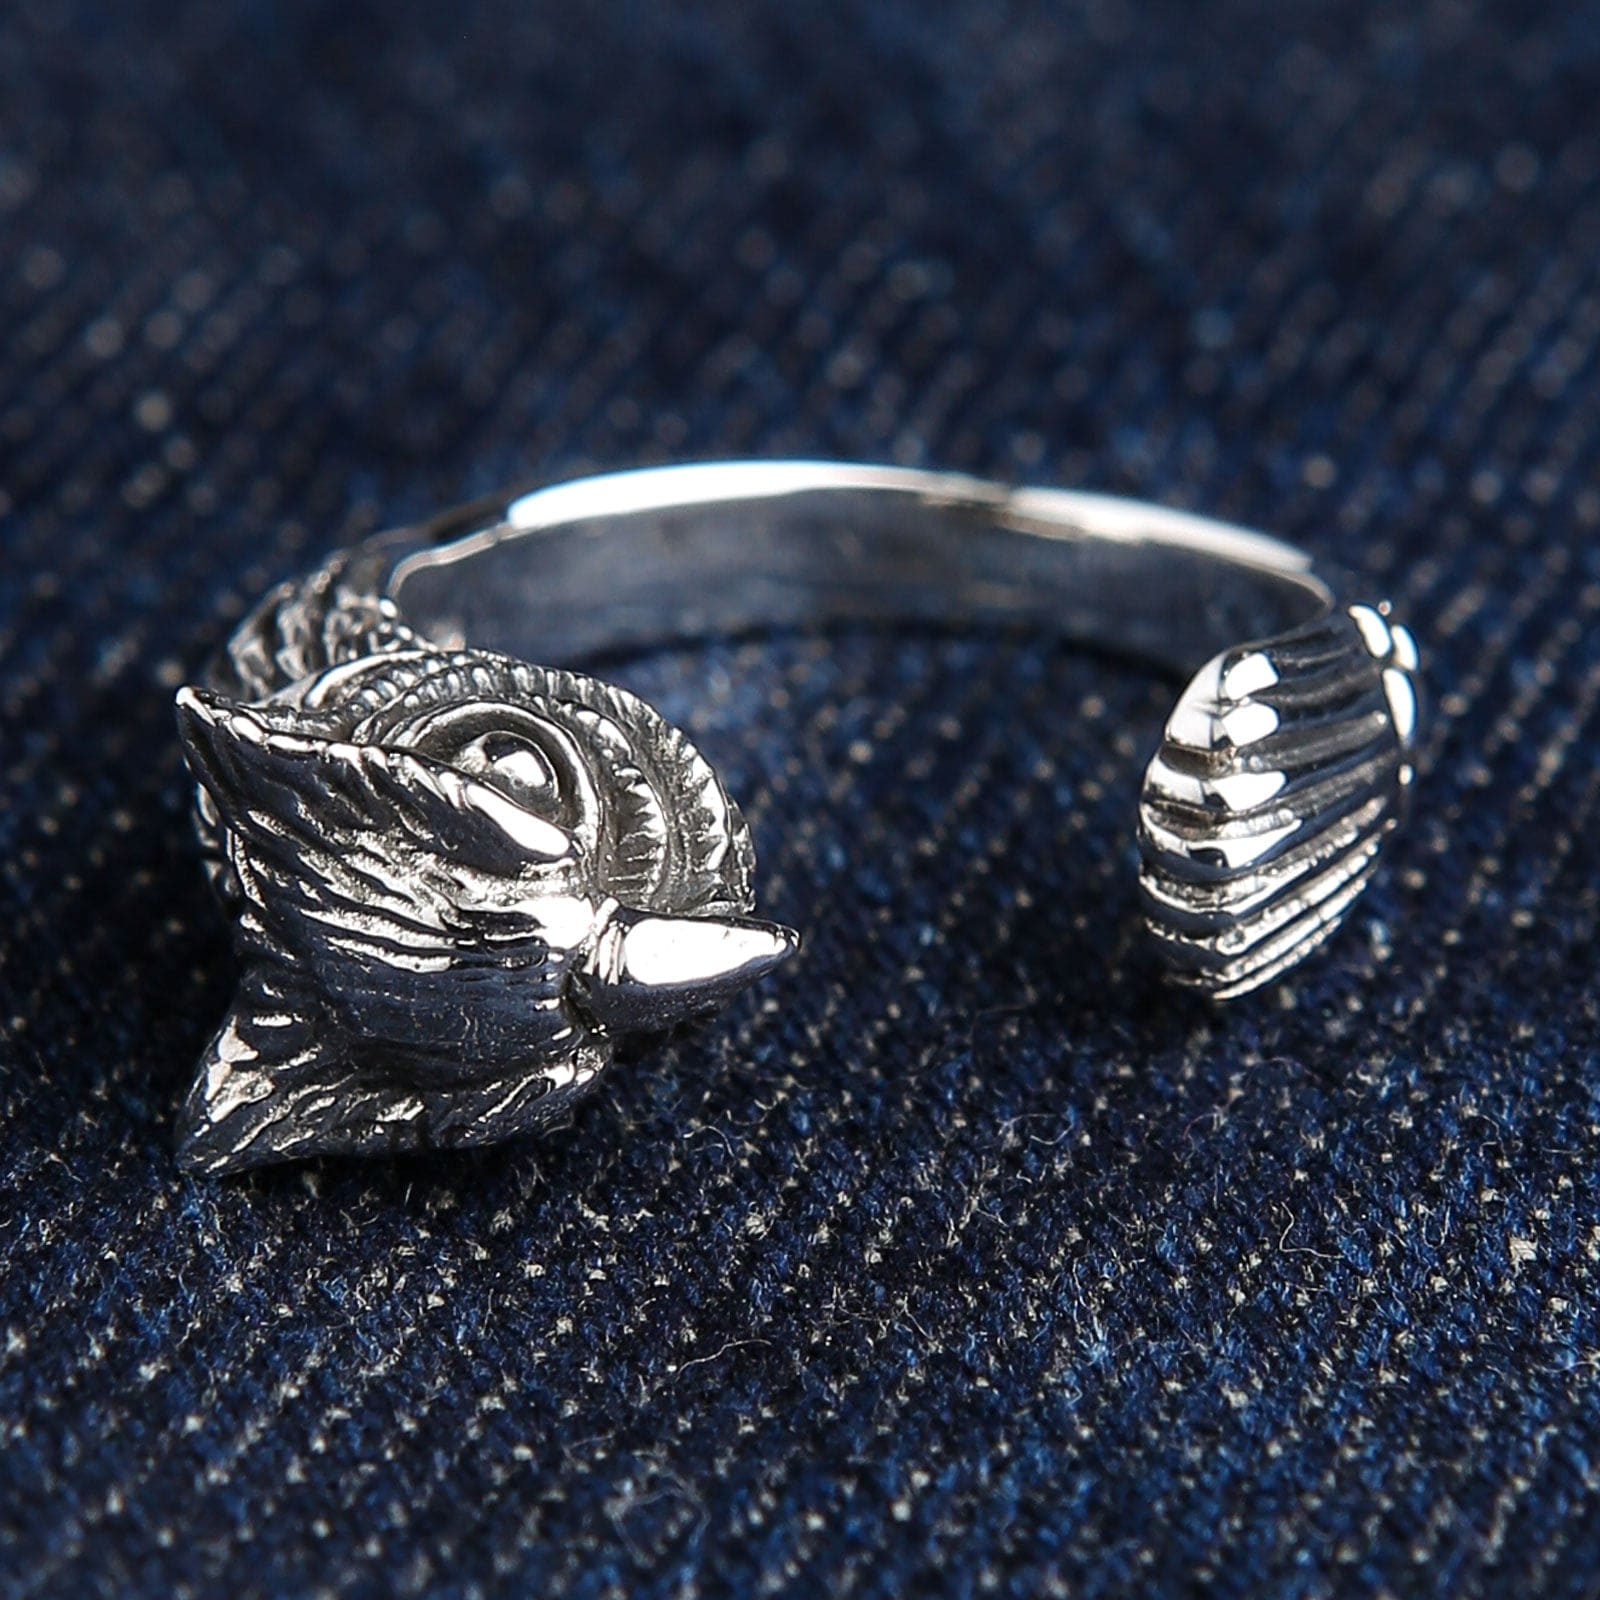 Buy Silver Peacock Ring, Peacock Jewelry, Silver Rings Online in India -  Etsy